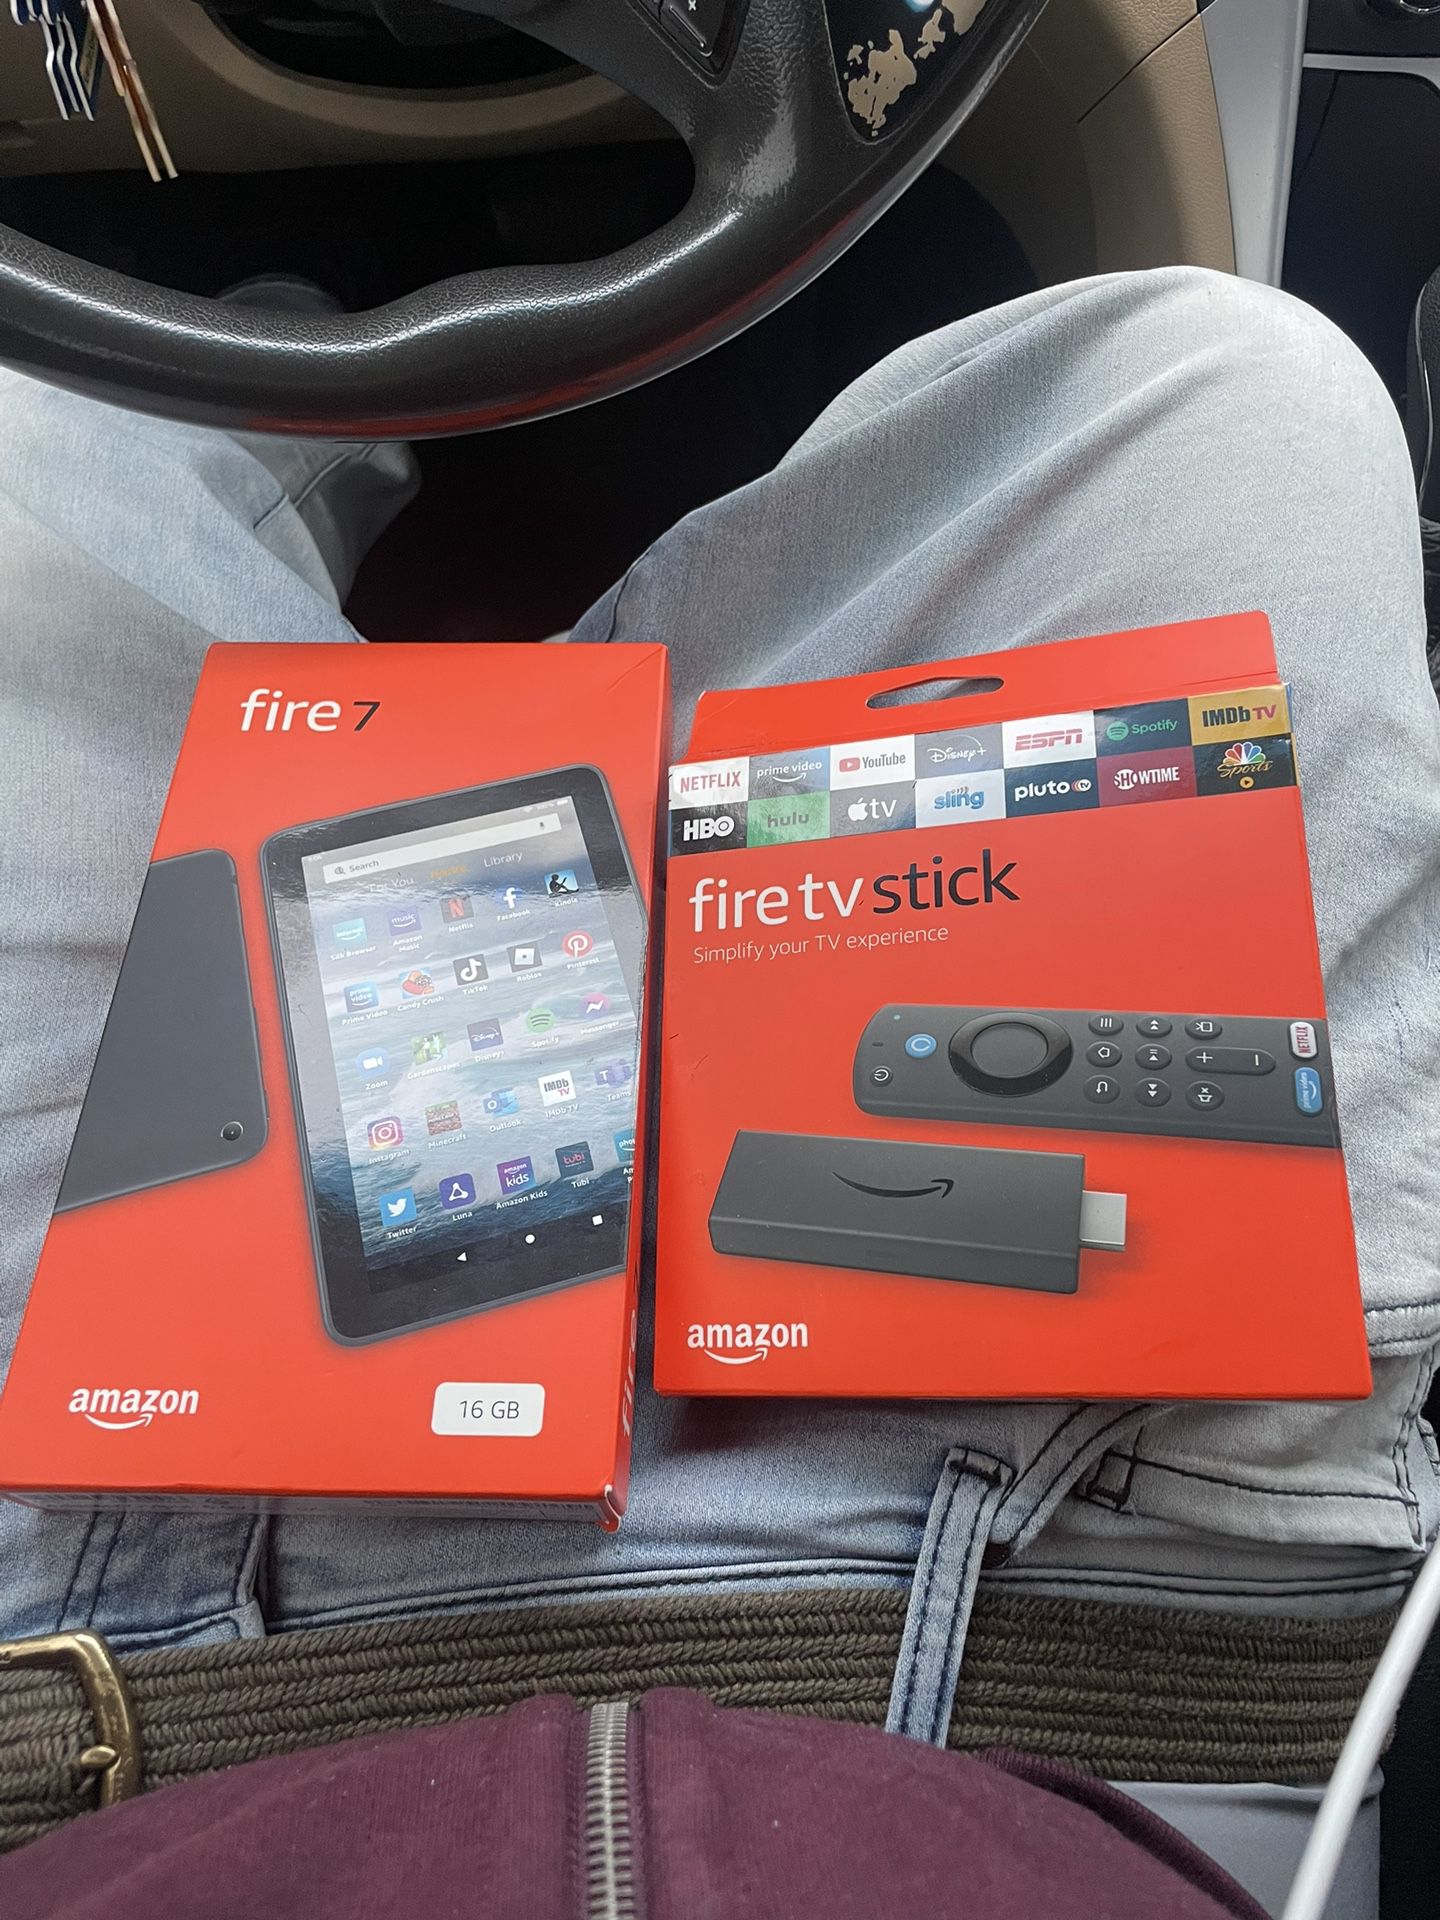 Fire stick And Fire 7 Tablets 